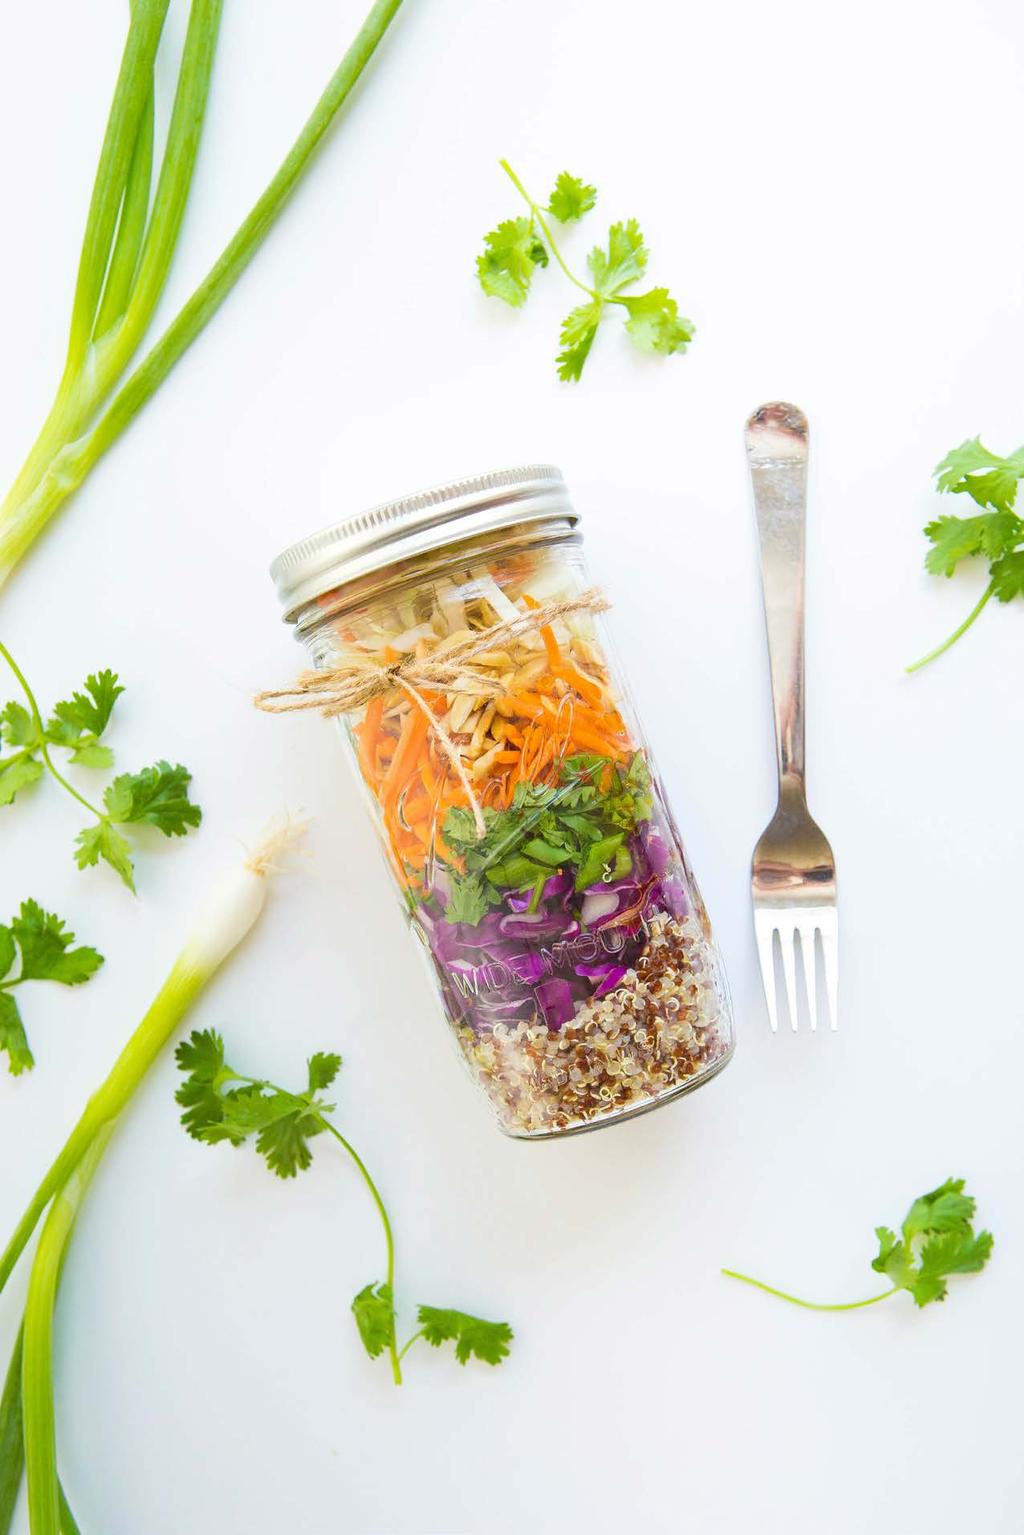 2. Asian Quinoa Mason Jar Salad Make this easy, tasty mason jar salad as a hearty vegan lunch that can be easily tucked in your work bag.